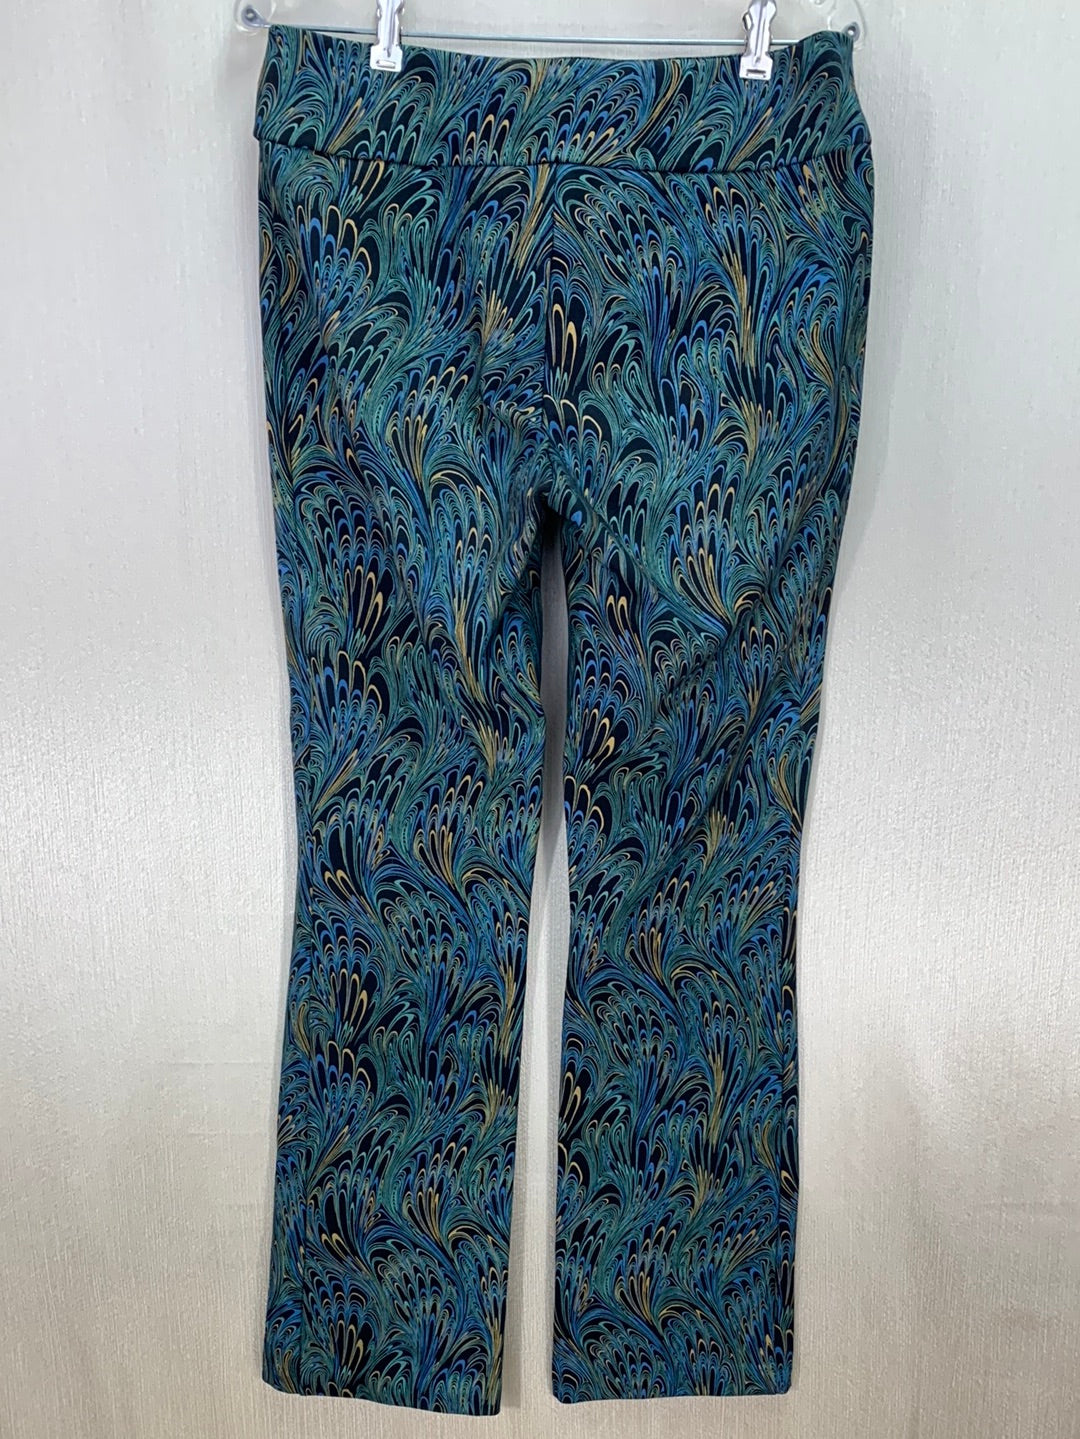 SOFT SURROUNDING peacock marble print Ponte Pull On Stretch Pants - M